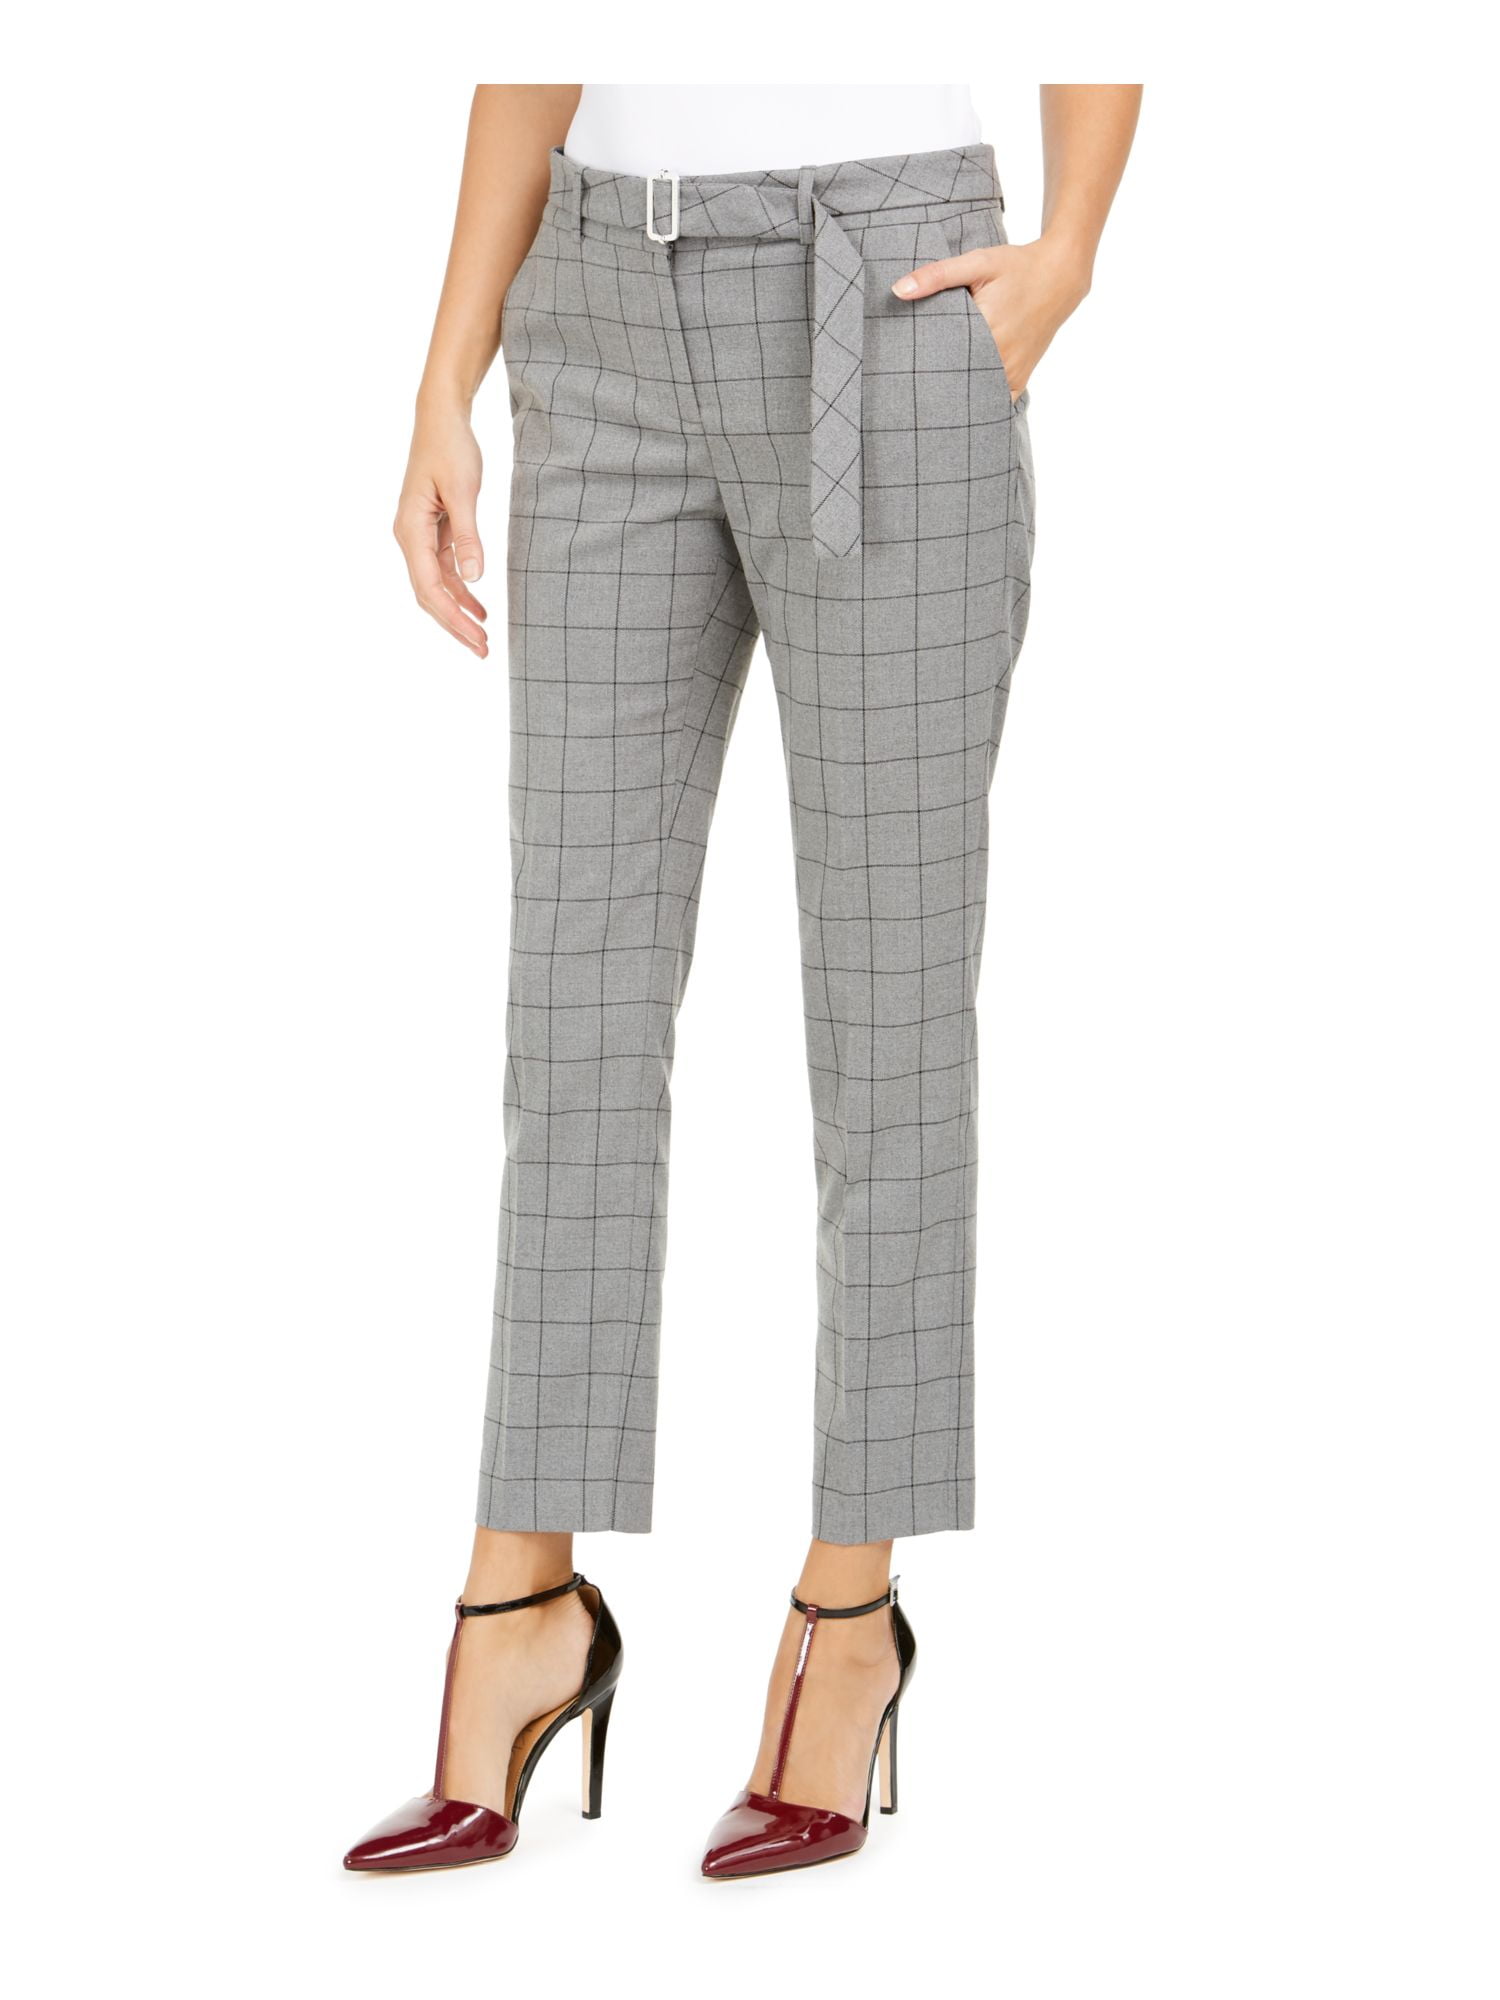 CALVIN KLEIN Womens Gray Belted Zippered Plaid Wear To Work Straight leg  Pants Petites 8P 